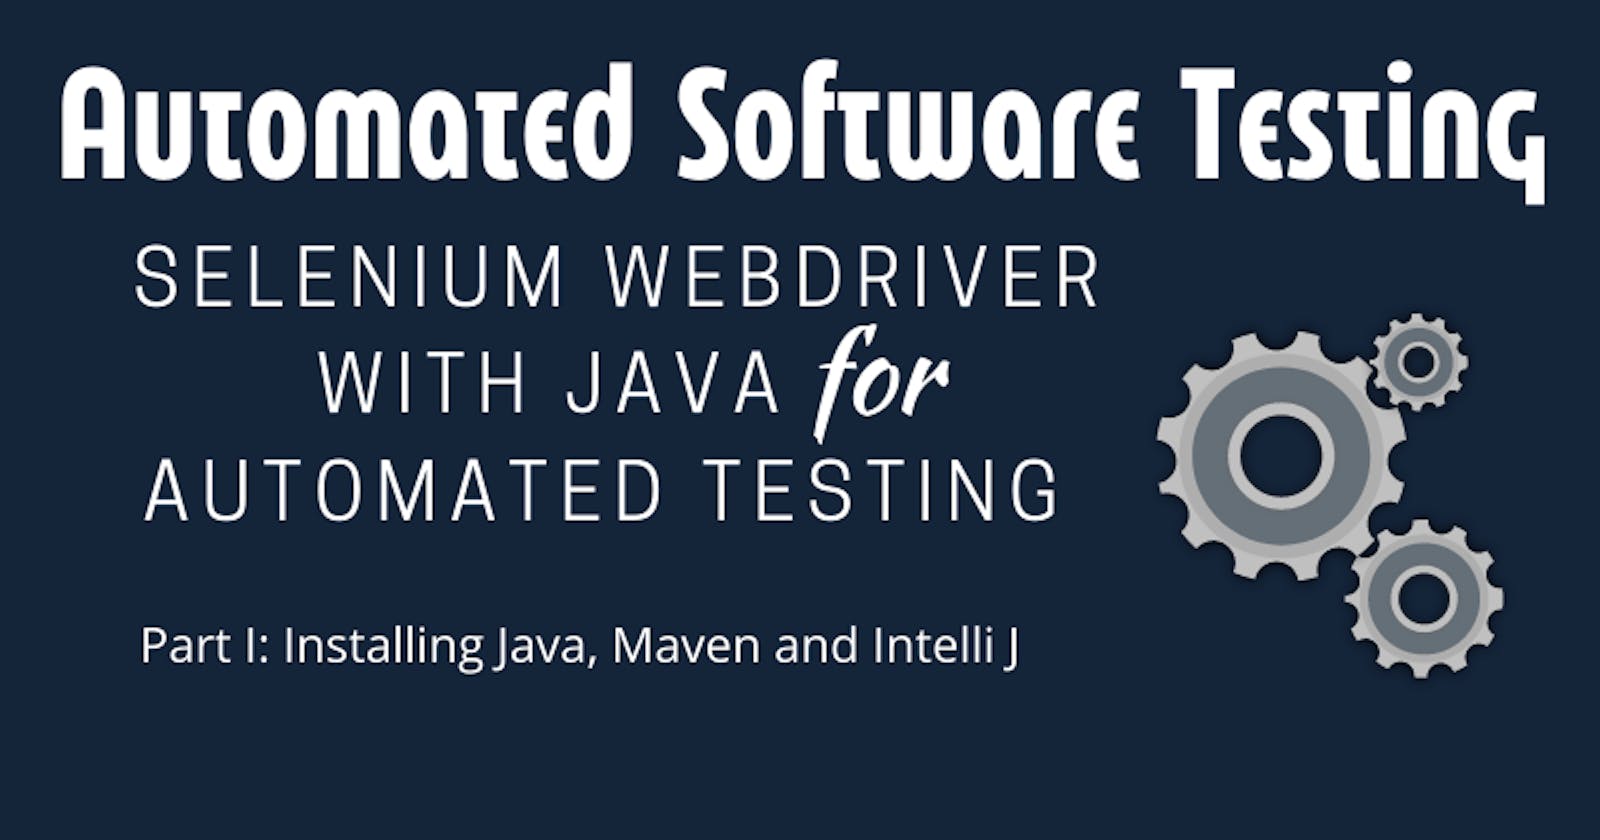 Using Selenium WebDriver With Java for Automated Testing: Part I